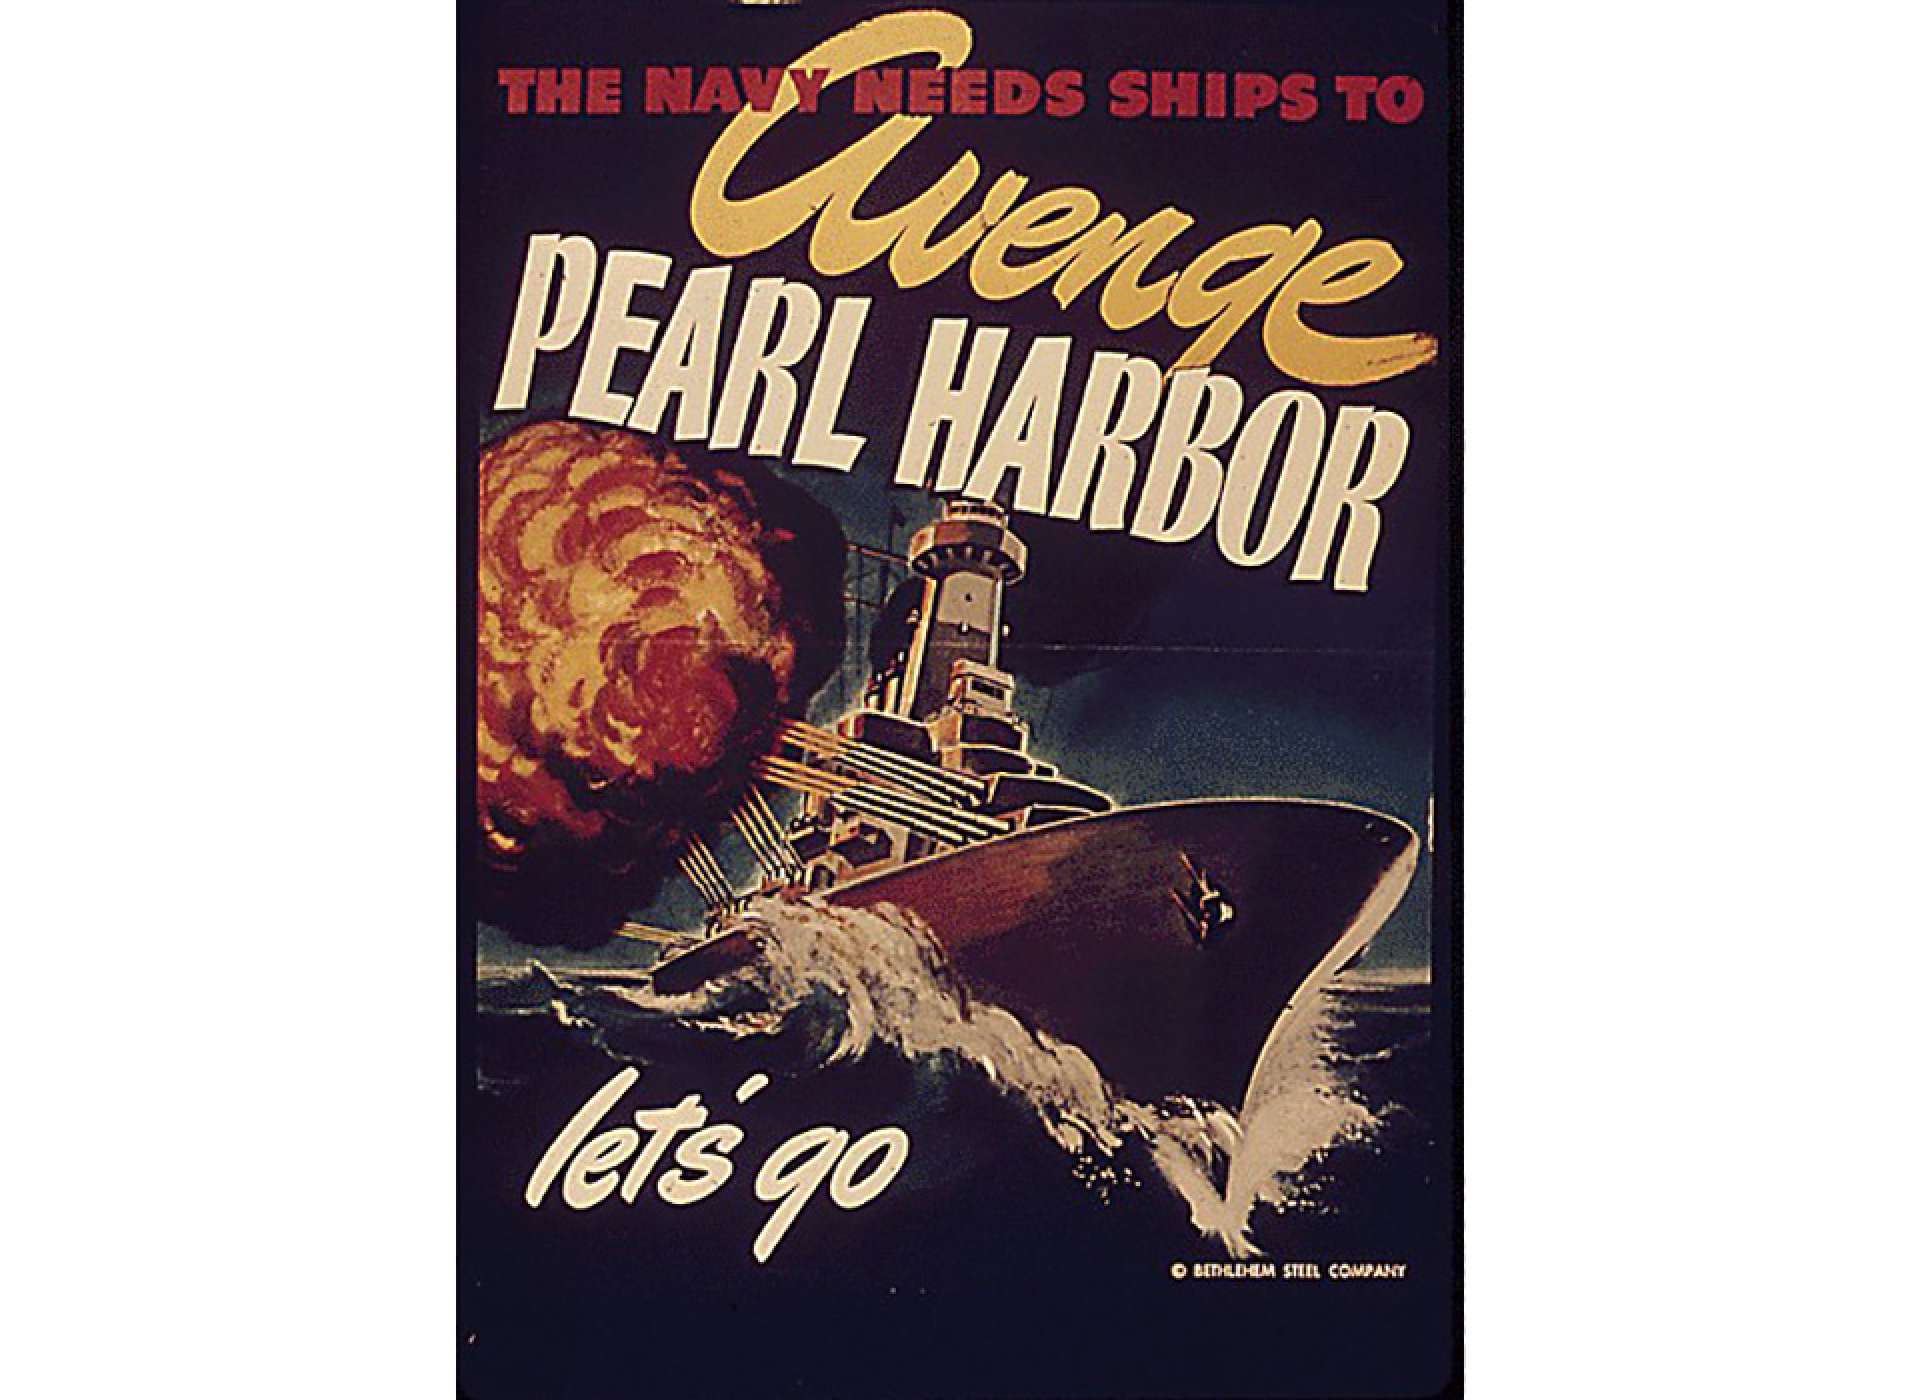 &quot;The Navy Needs Ships To Avenge Pearl Harbor&quot;